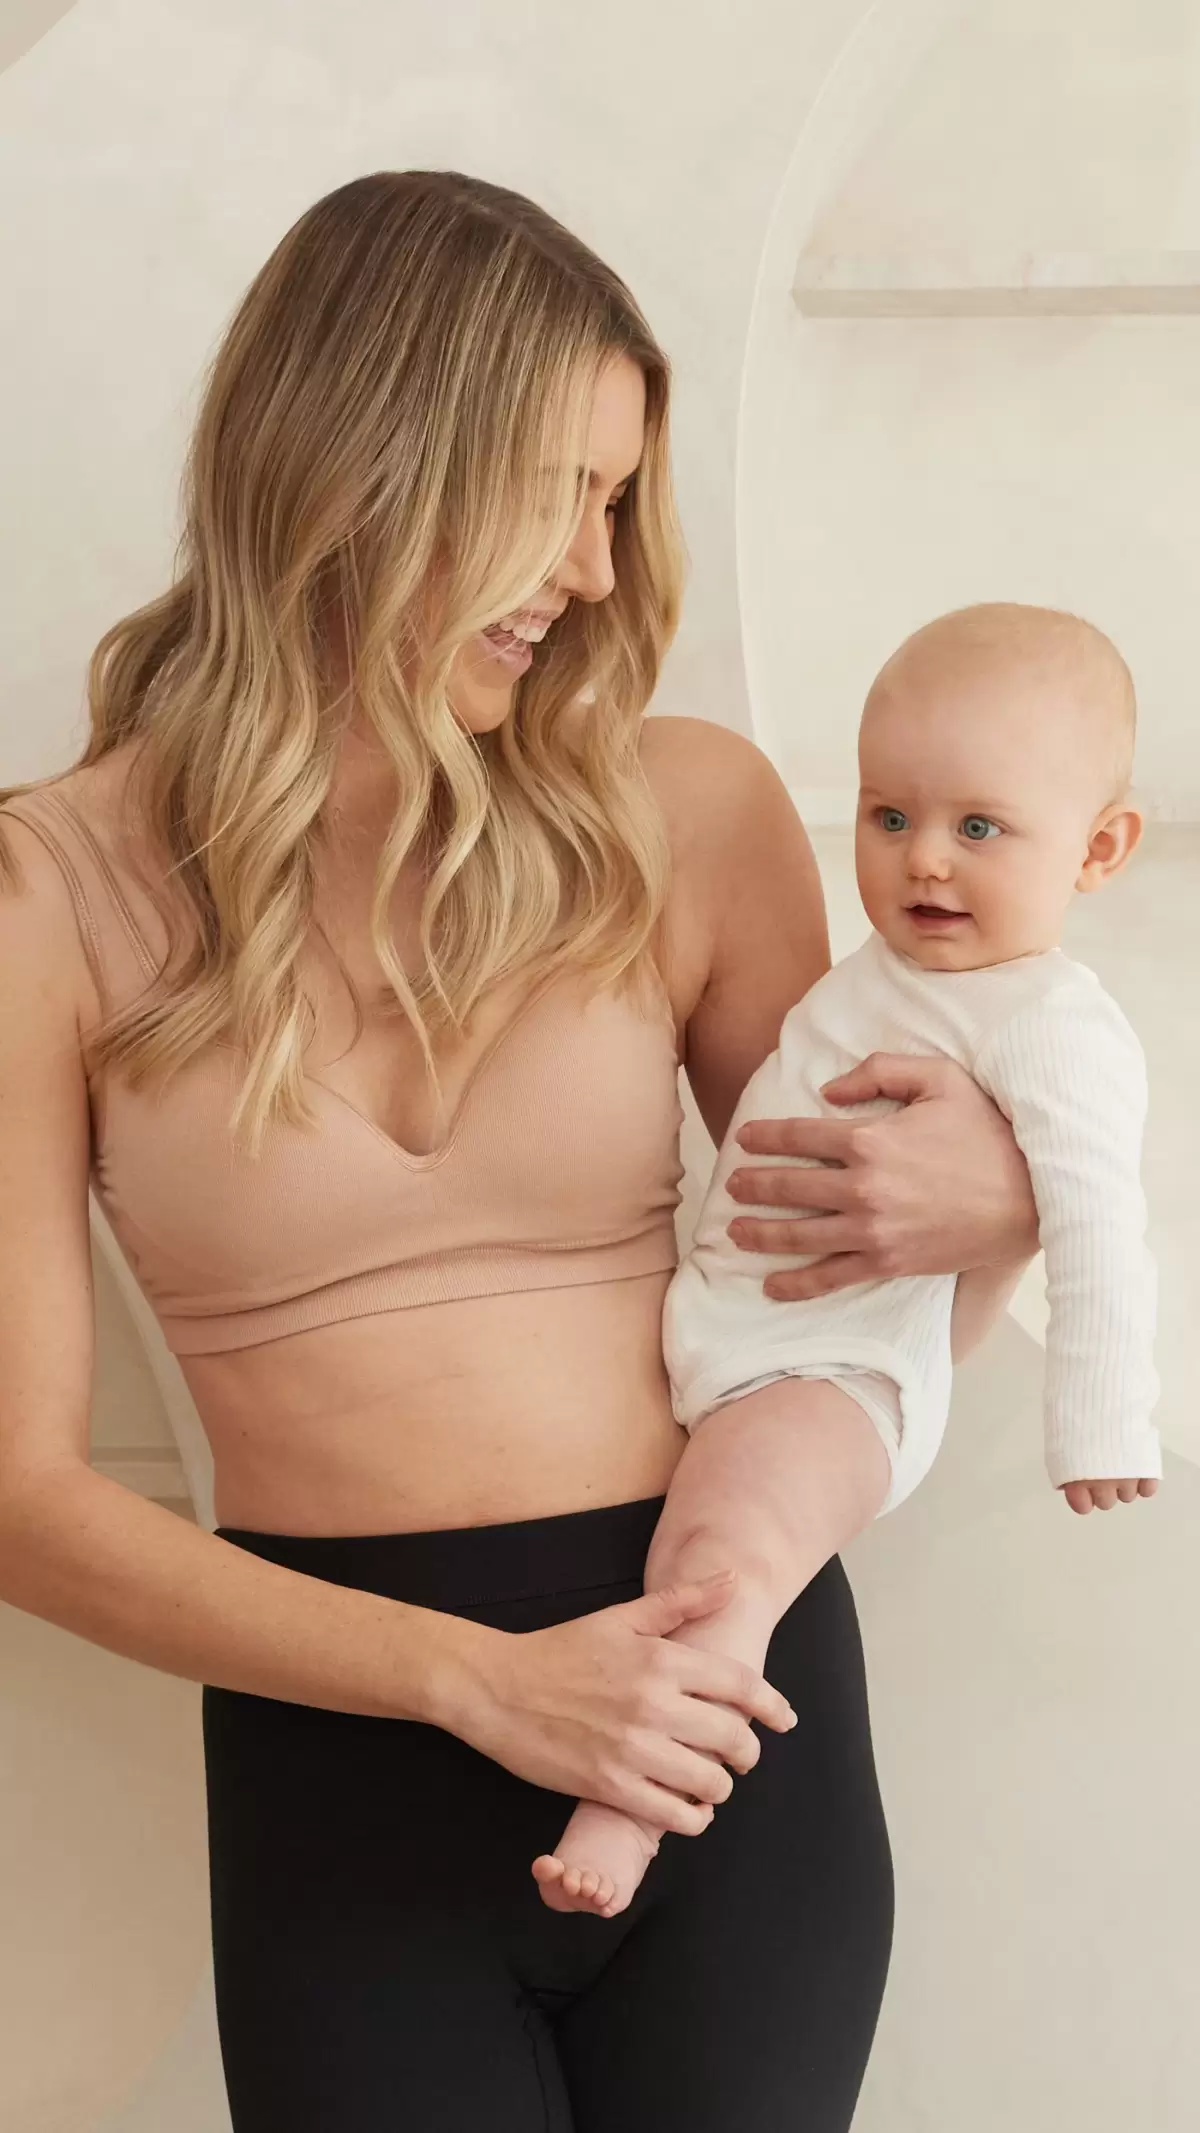 Ultimate Maternity Bra Found: 5 Reasons You'll Love It! - One Fine Baby